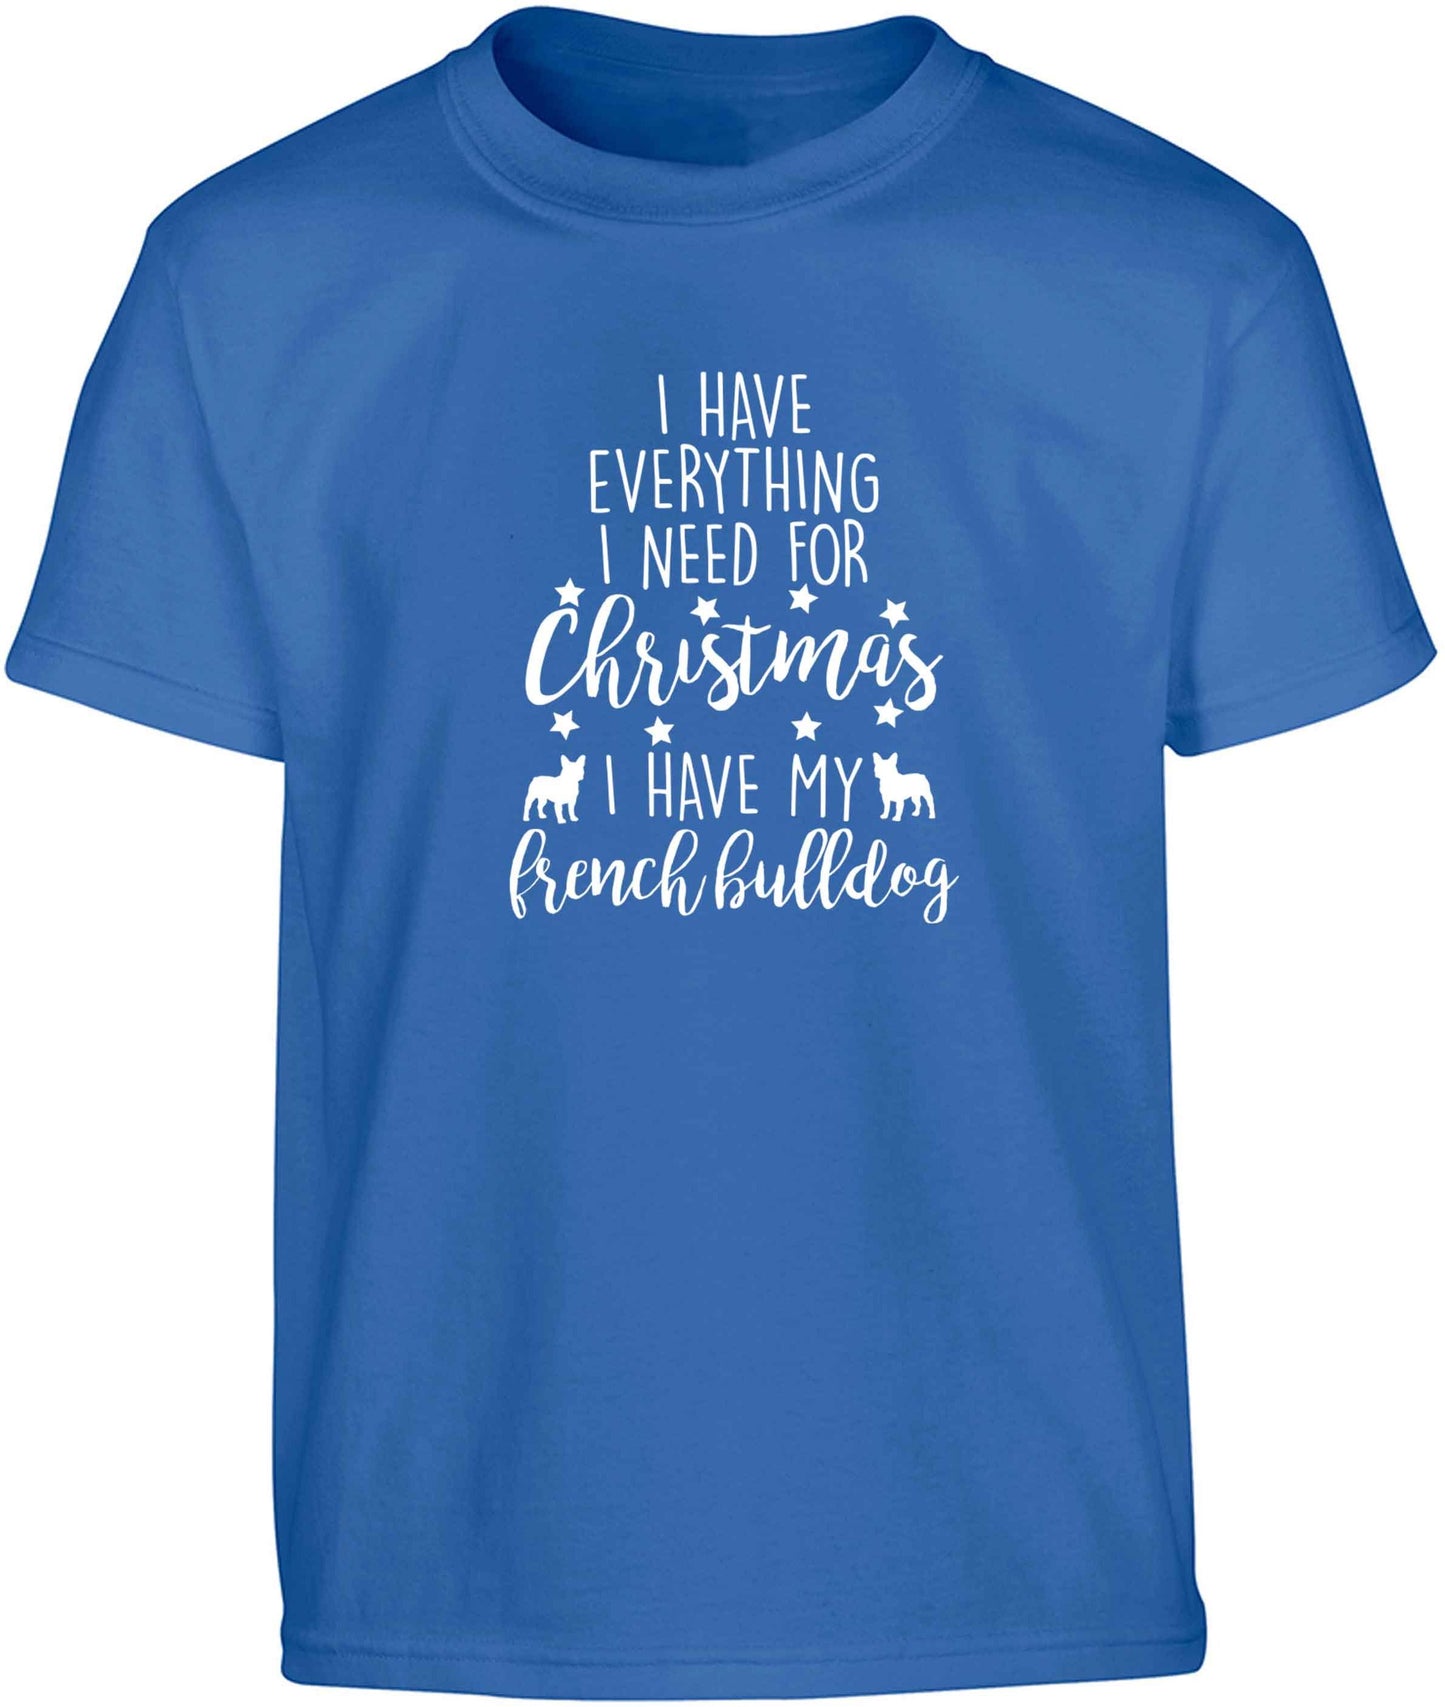 I have everything I need for Christmas I have my french bulldog Children's blue Tshirt 12-13 Years